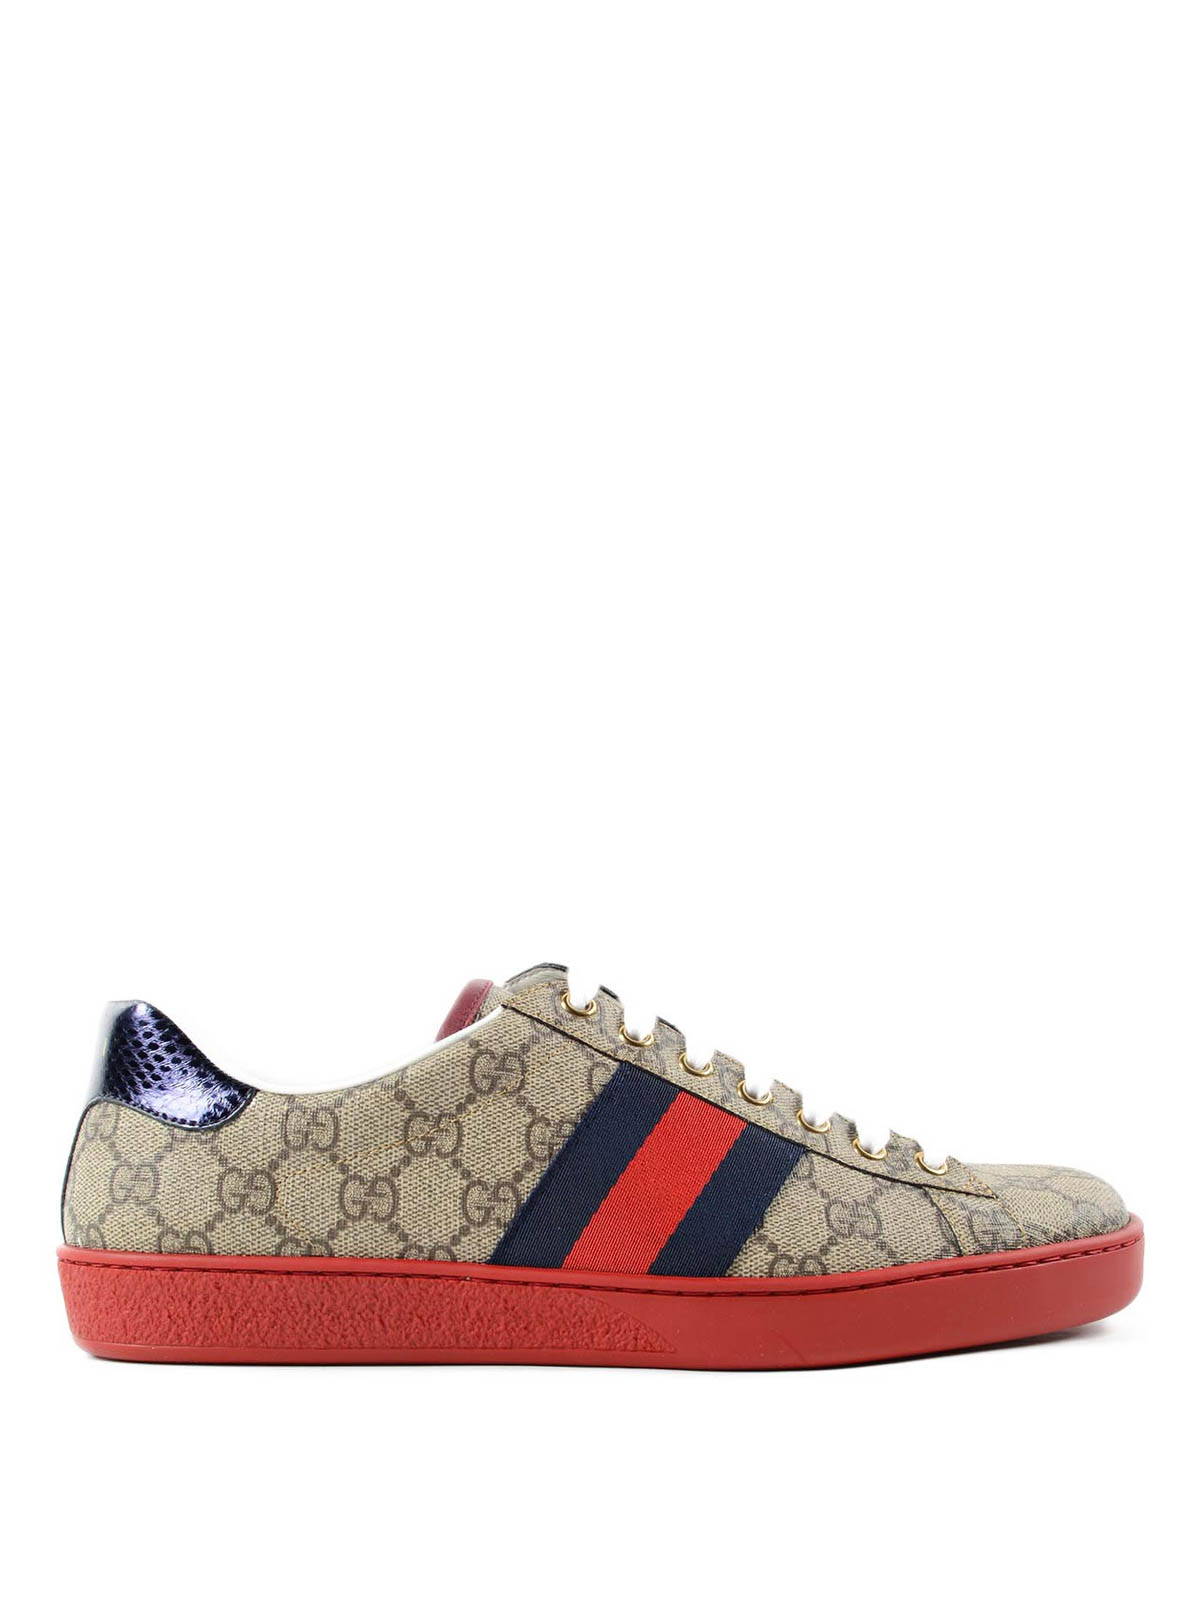 gucci mens trainers sale online